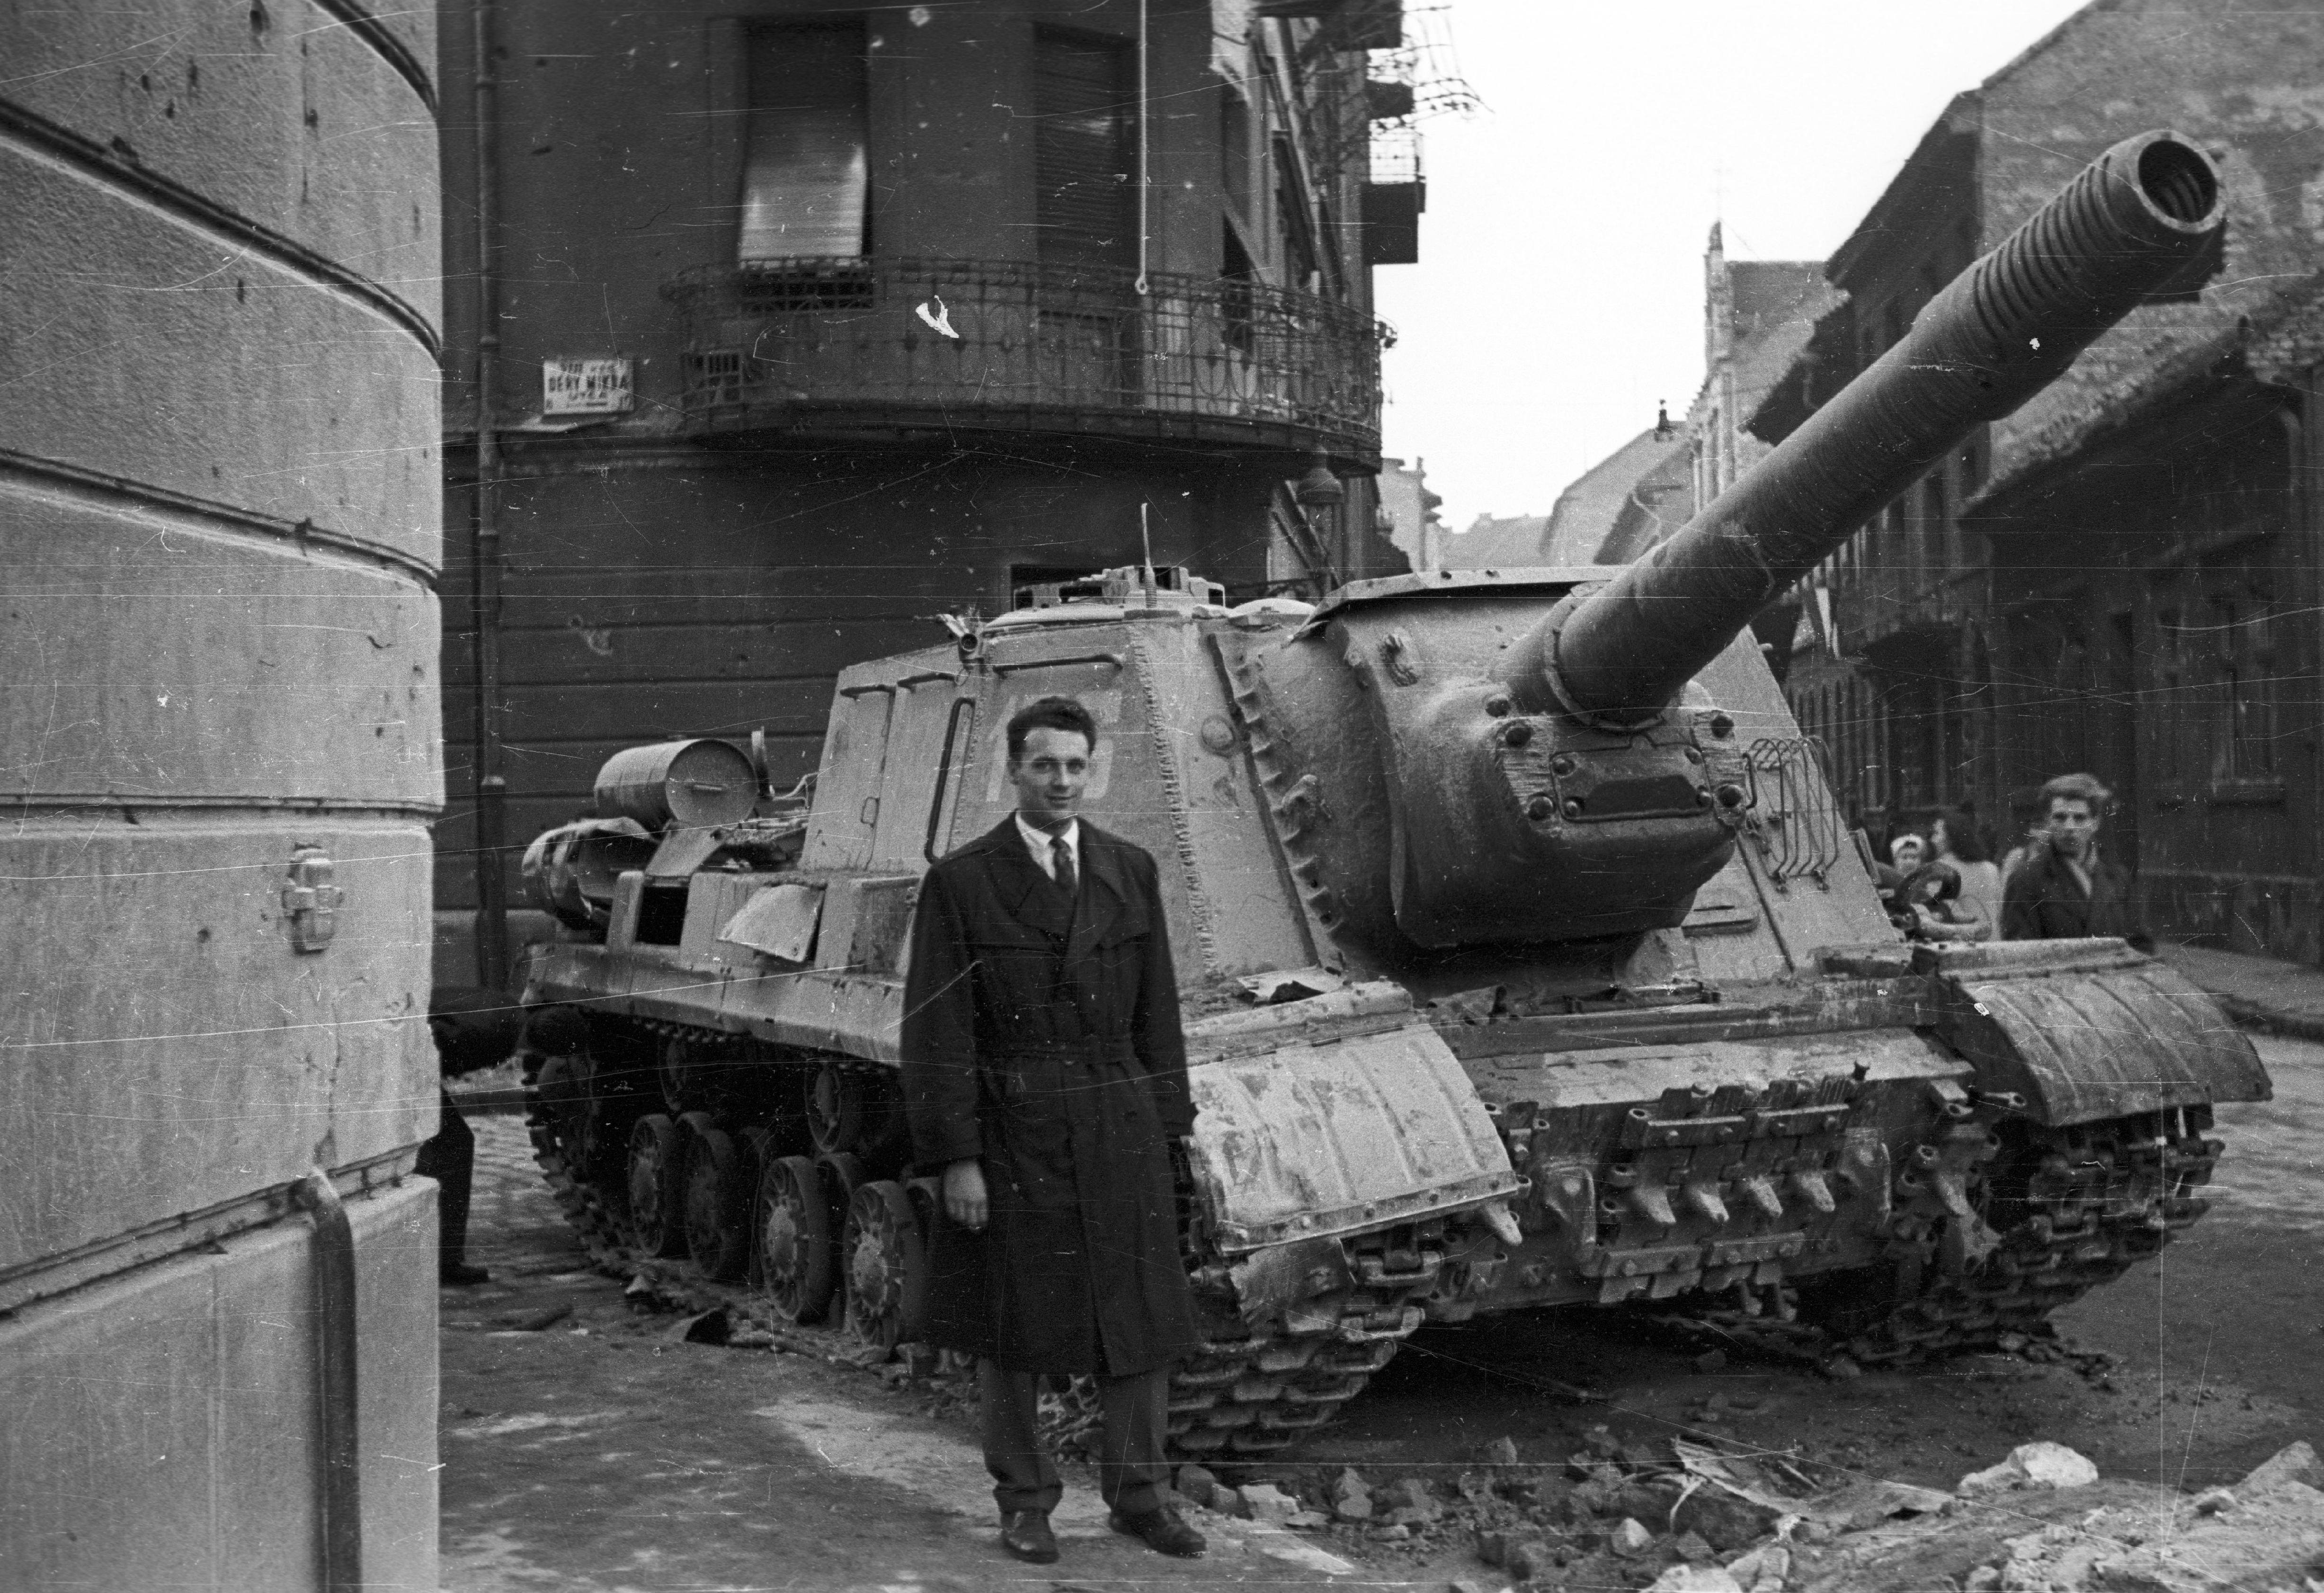 ISU-152 self-propelled gun at the intersection of Fecske Street and Déri Miksa Street, Budapest, Hungary, 30 Oct 1956, photo 3 of 7